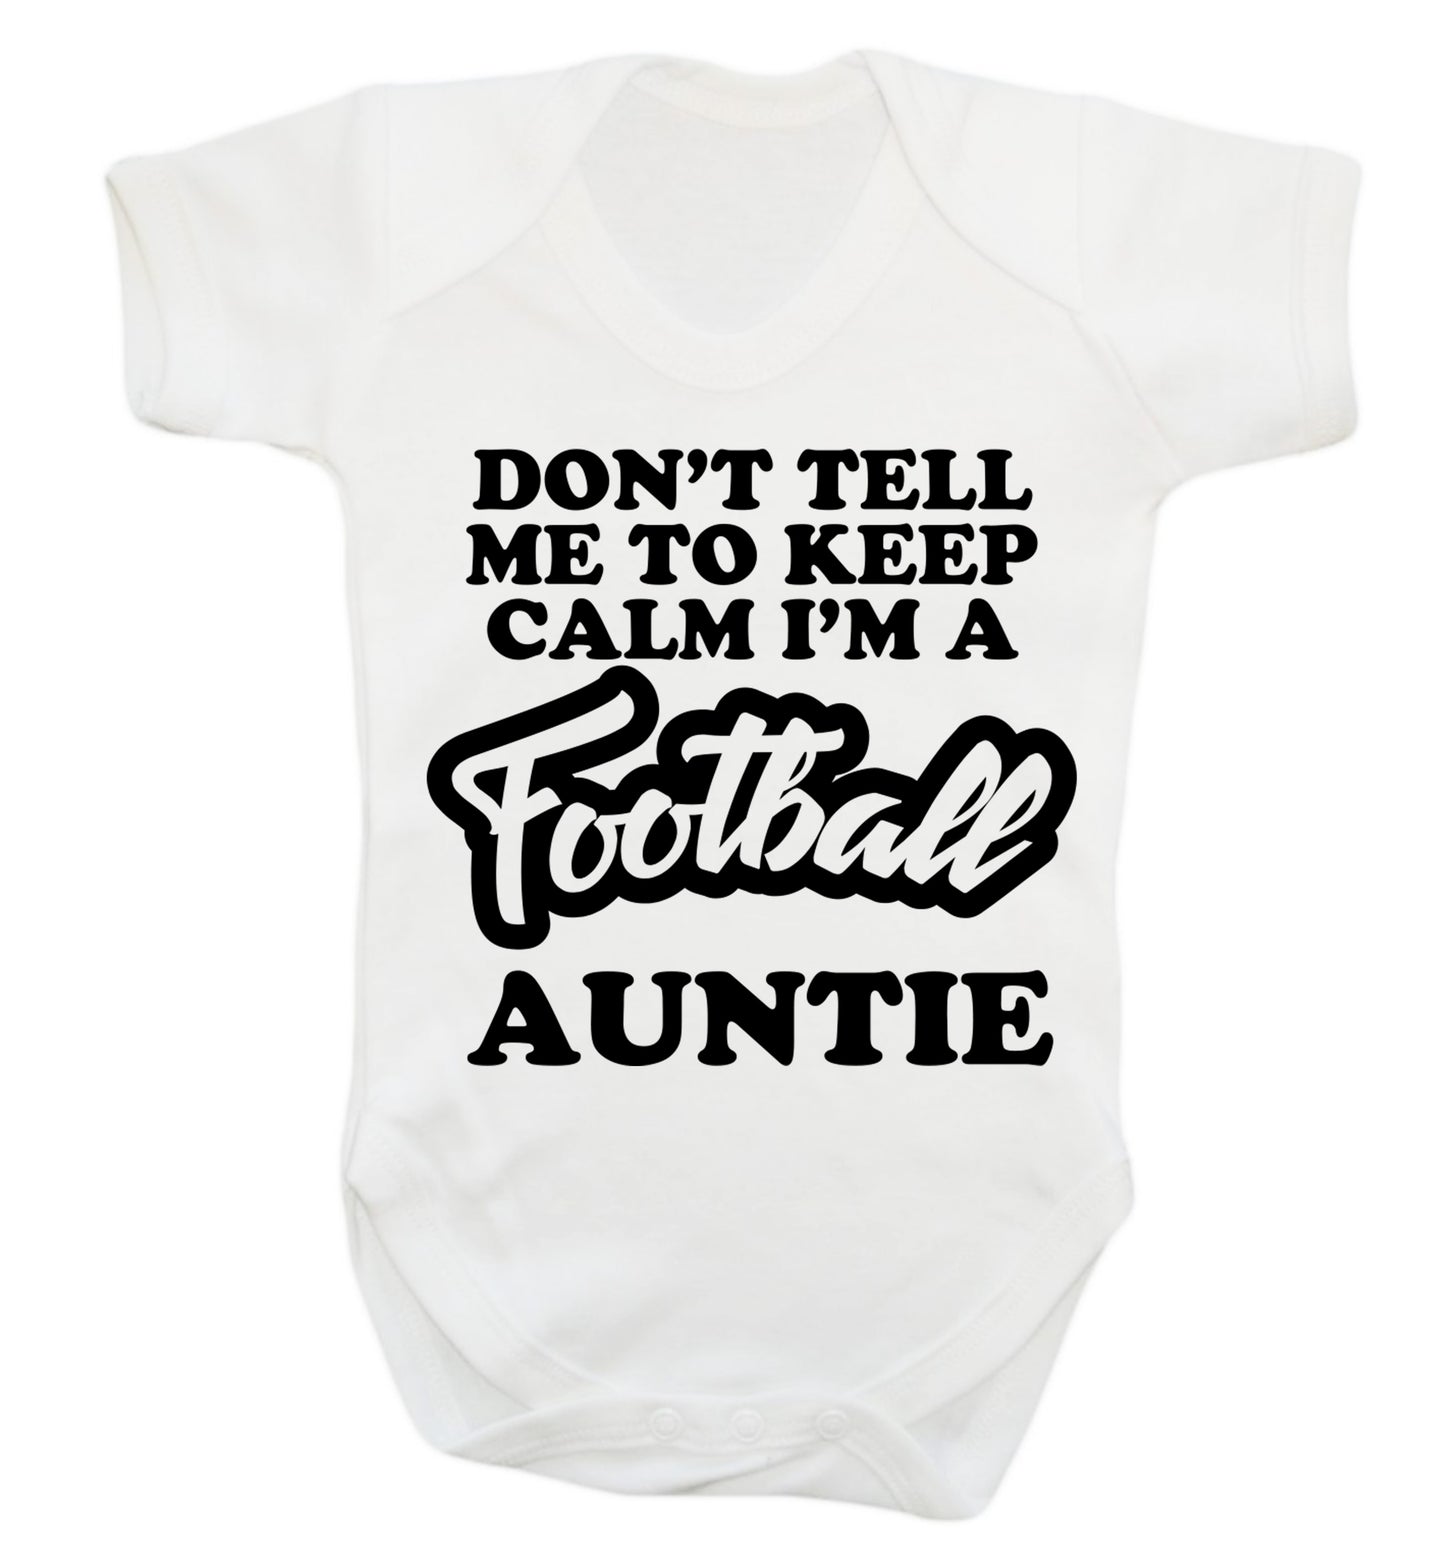 Don't tell me to keep calm I'm a football auntie Baby Vest white 18-24 months